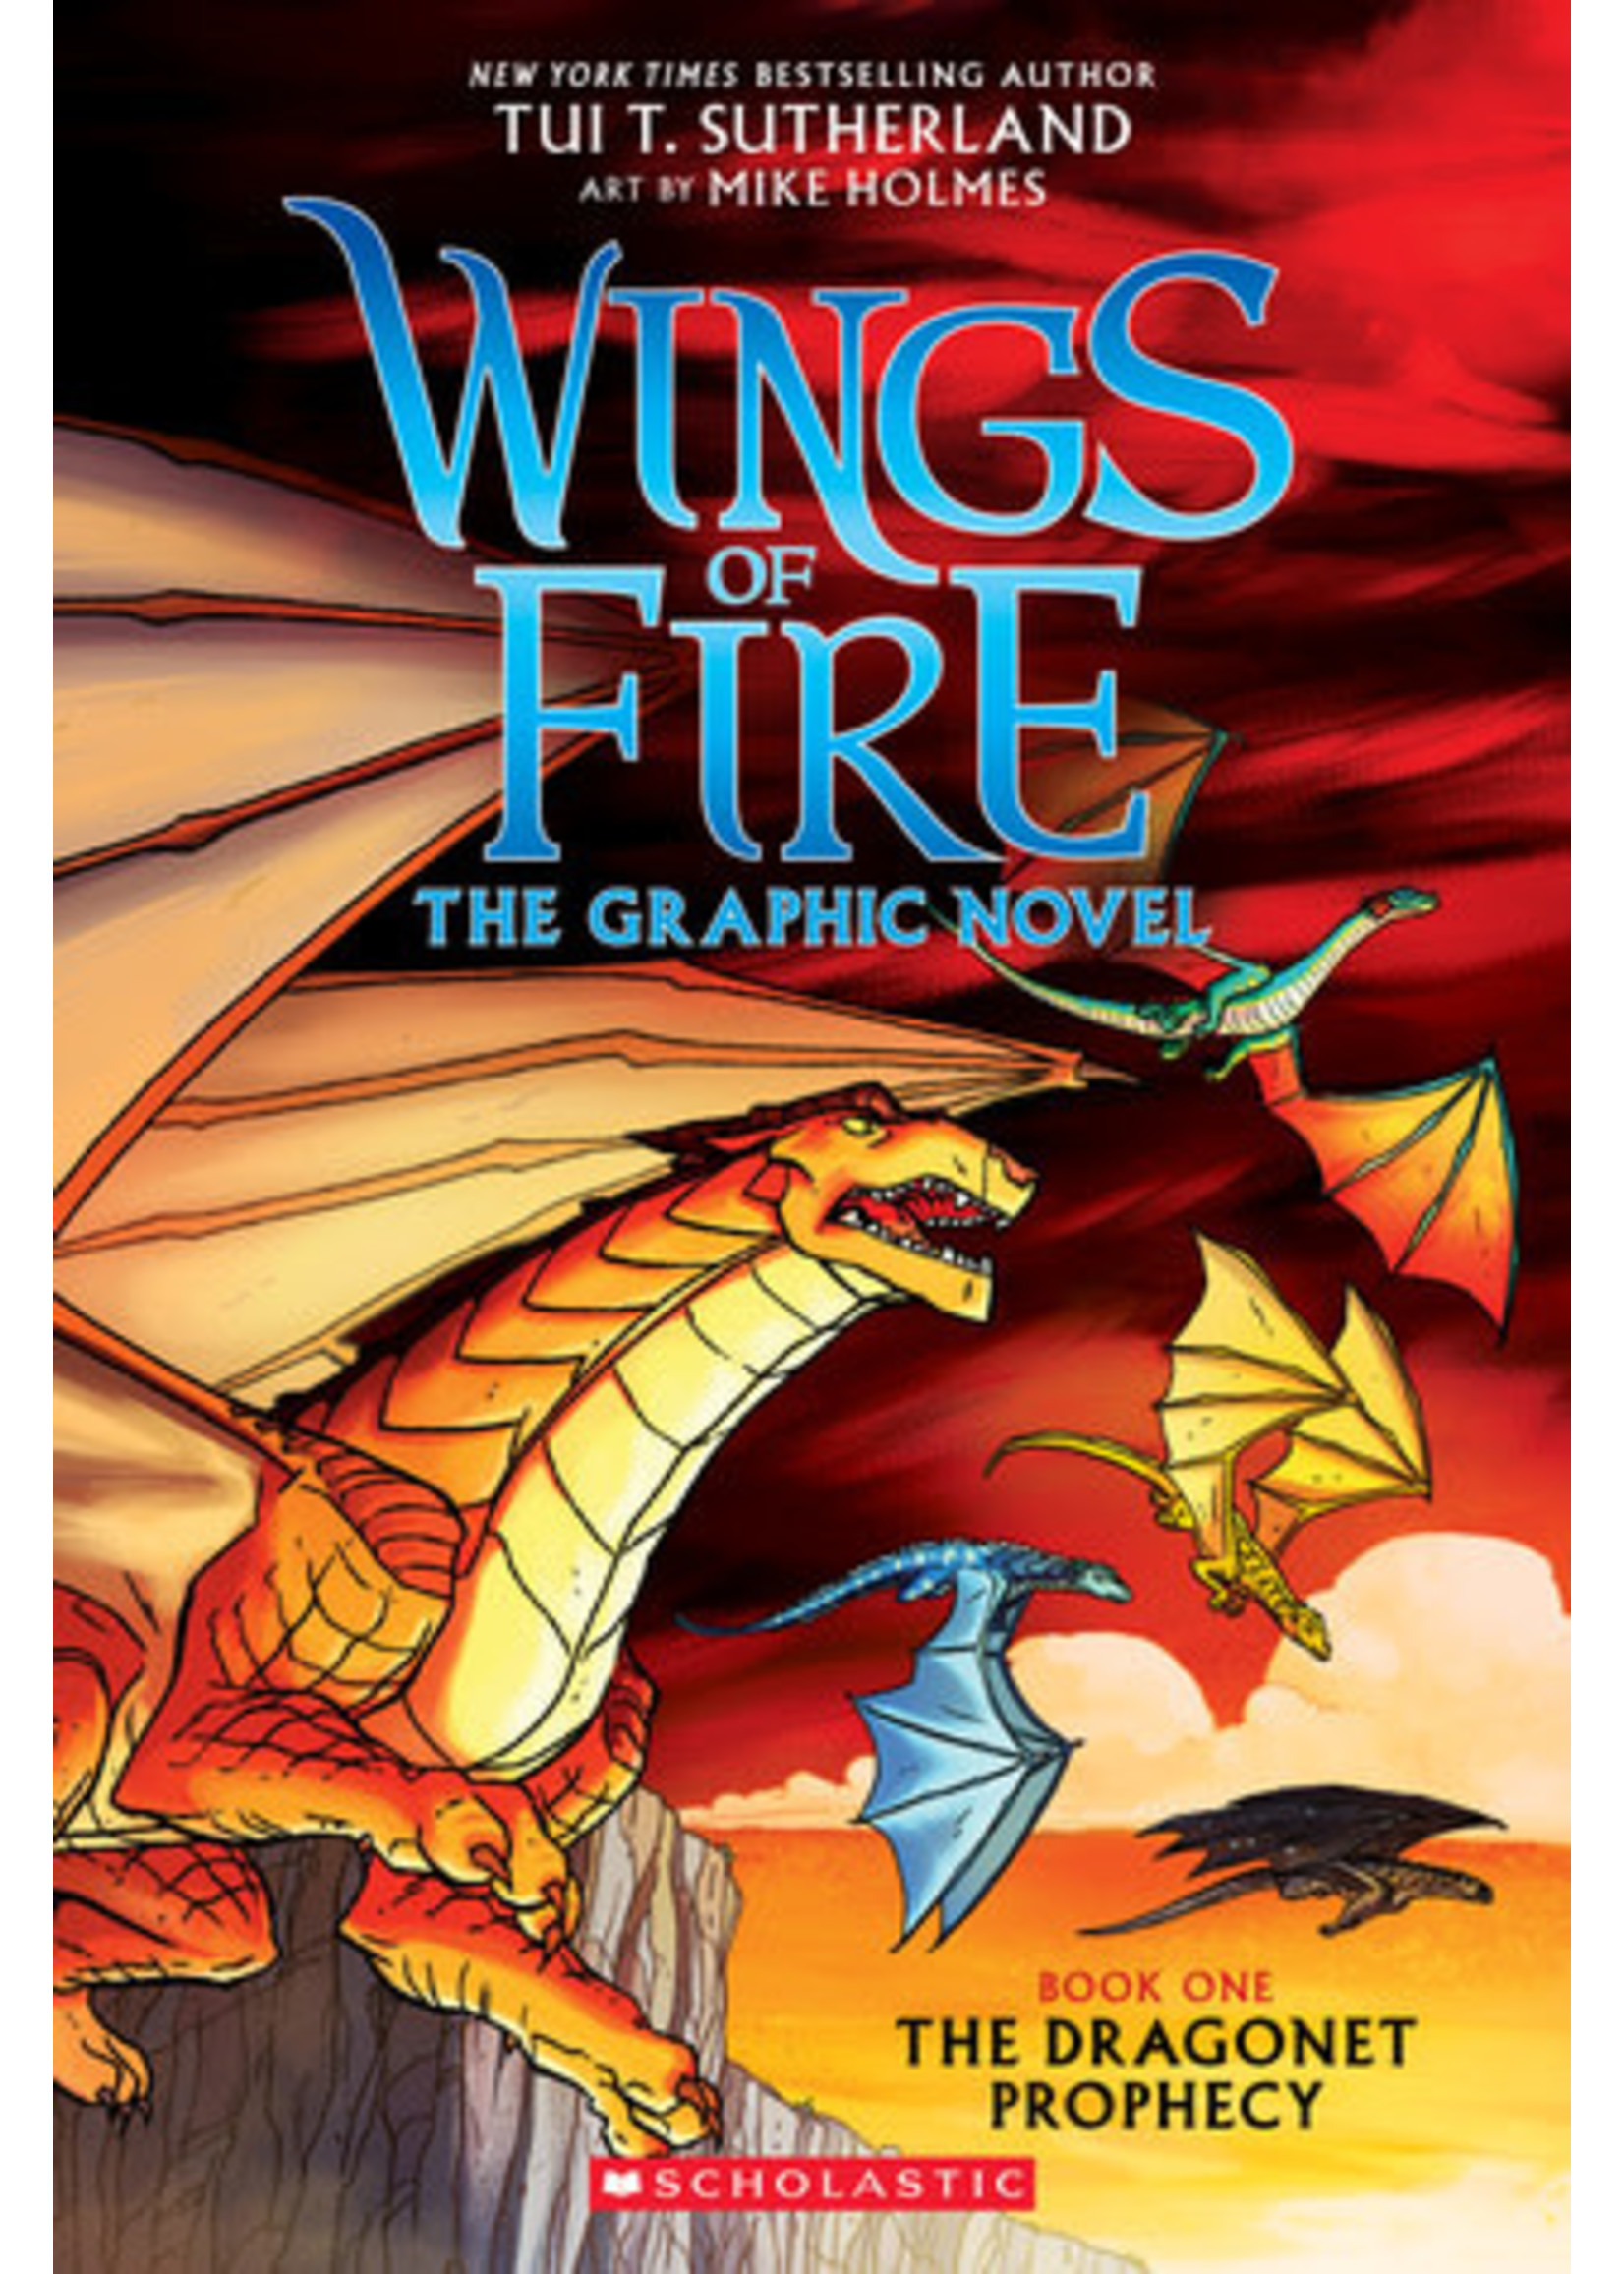 The Dragonet Prophecy (Wings of Fire Graphic Novel #1) by Tui T. Sutherland